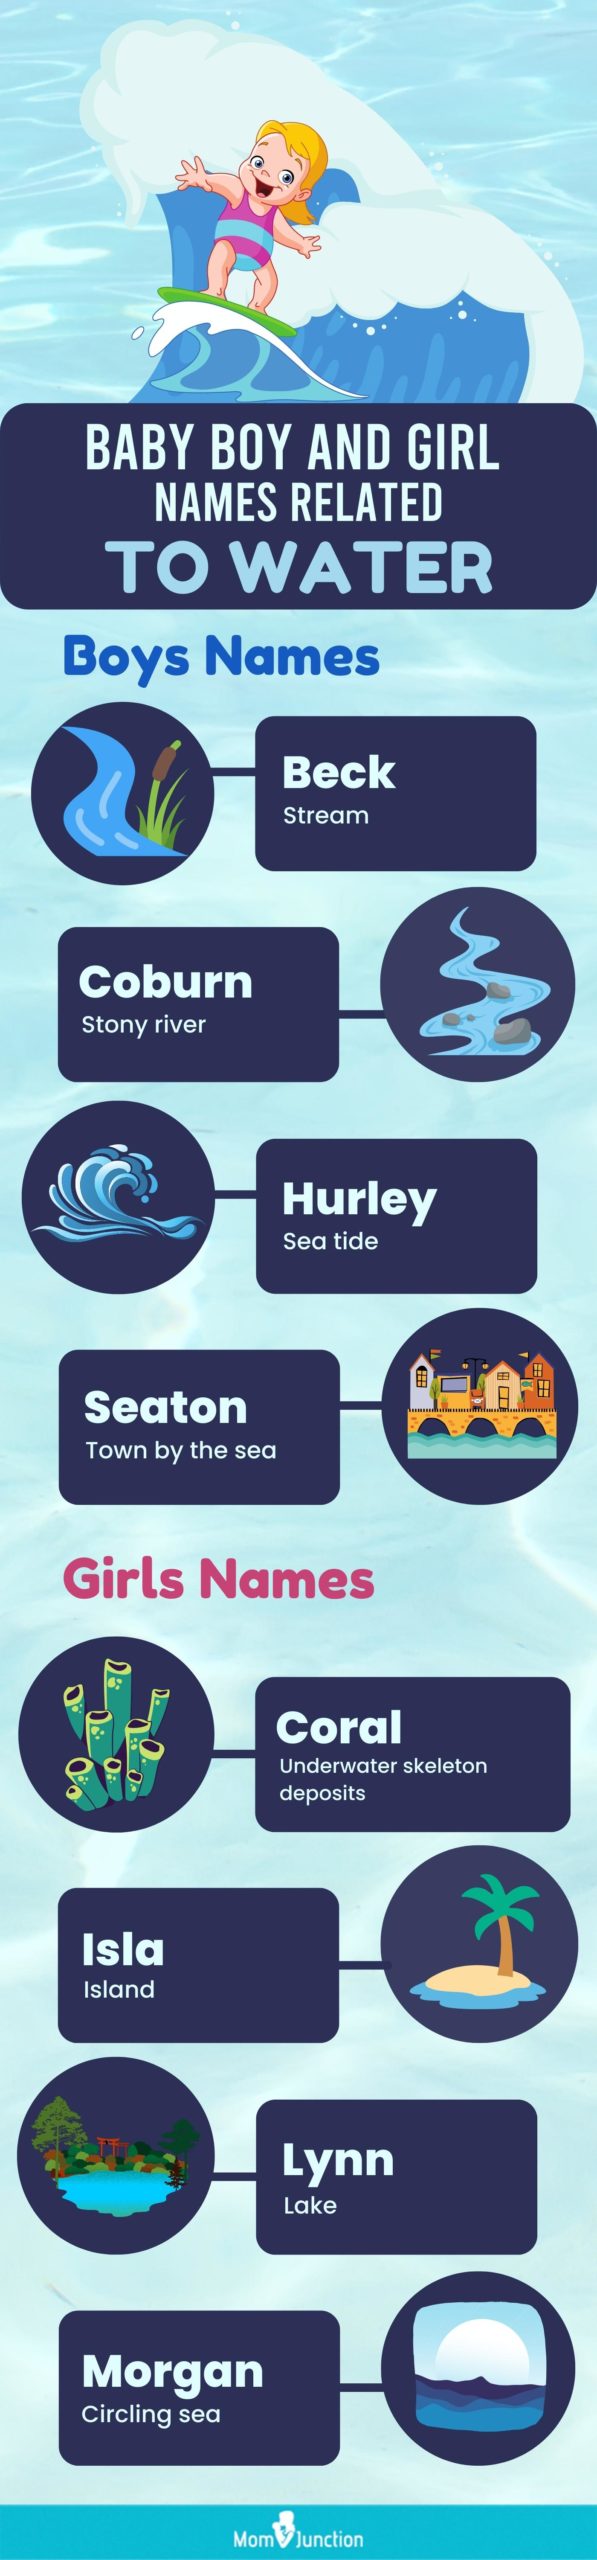 baby boy and girl names related to water (infographic)